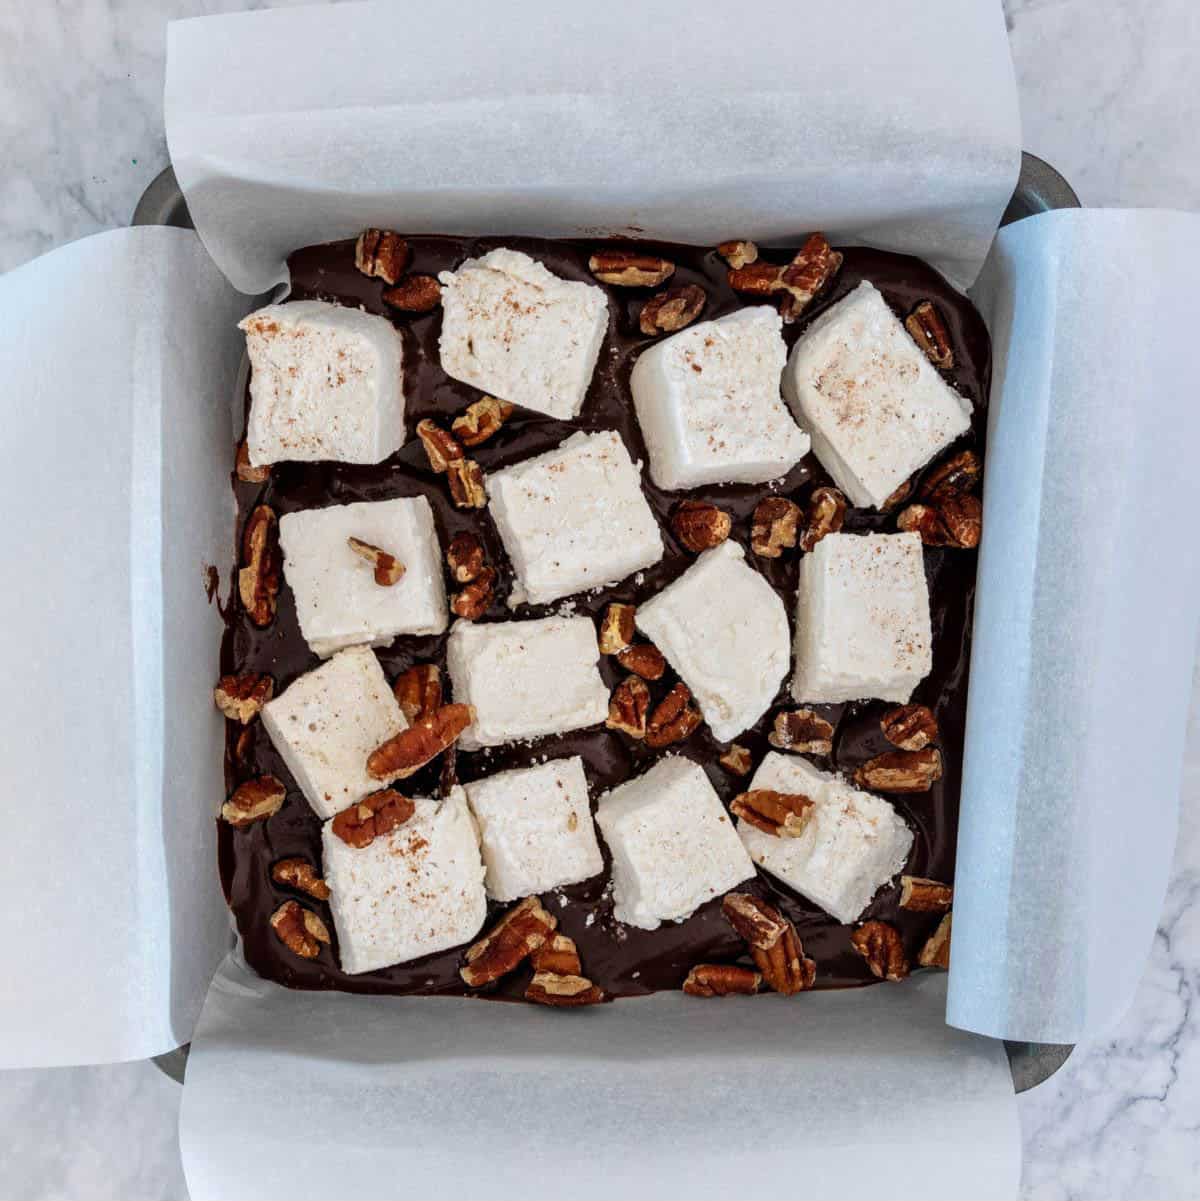 Marshmallows and pecans on a layer of chocolate.